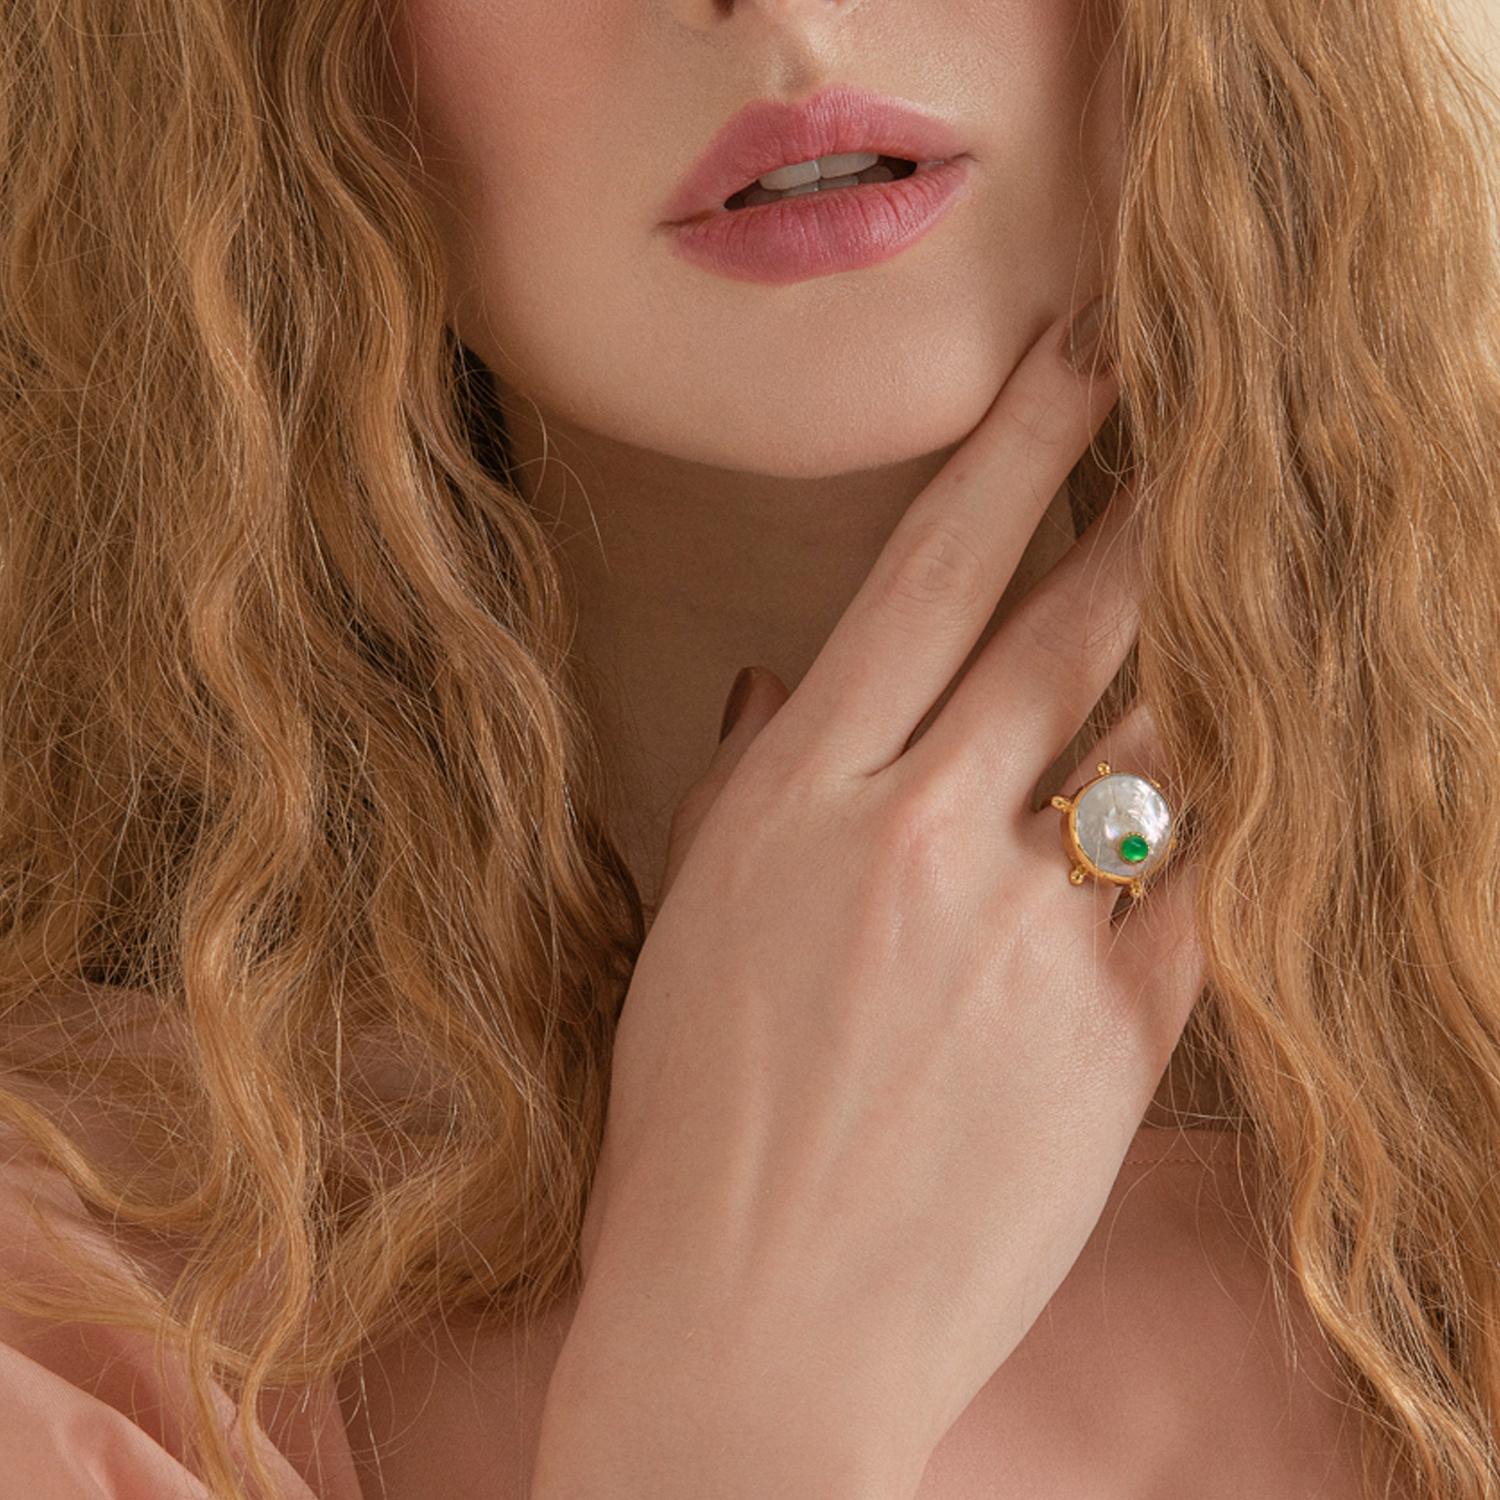 Founder of Vintouch Alessandro Ricevuto loves keshi pearls for their beautifully irregular forms which definitely makes each of them a one-of-a-kind. The 'Rebel Rebel' ring is handmade in the brand's Italian studio featuring a 1.8 cm. pearl that is